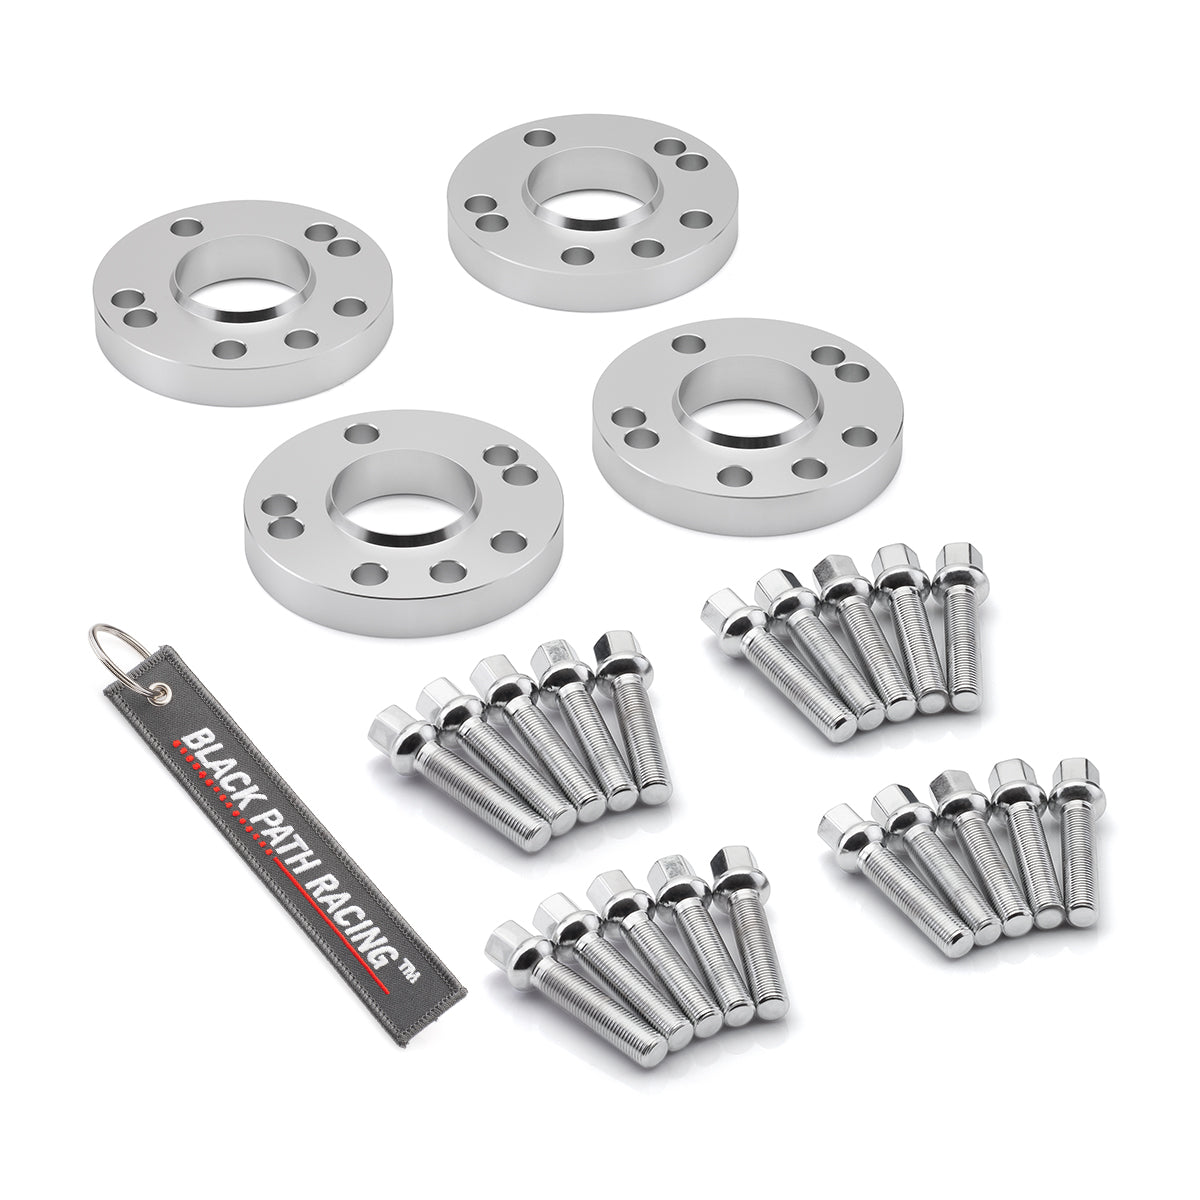 1985-1998 Volkswagen Golf 4x100 57.1 M12 Studs Hubcentric Wheelcentric Wheel Spacers Set of 4-Wheel Spacer-Blackpathinc